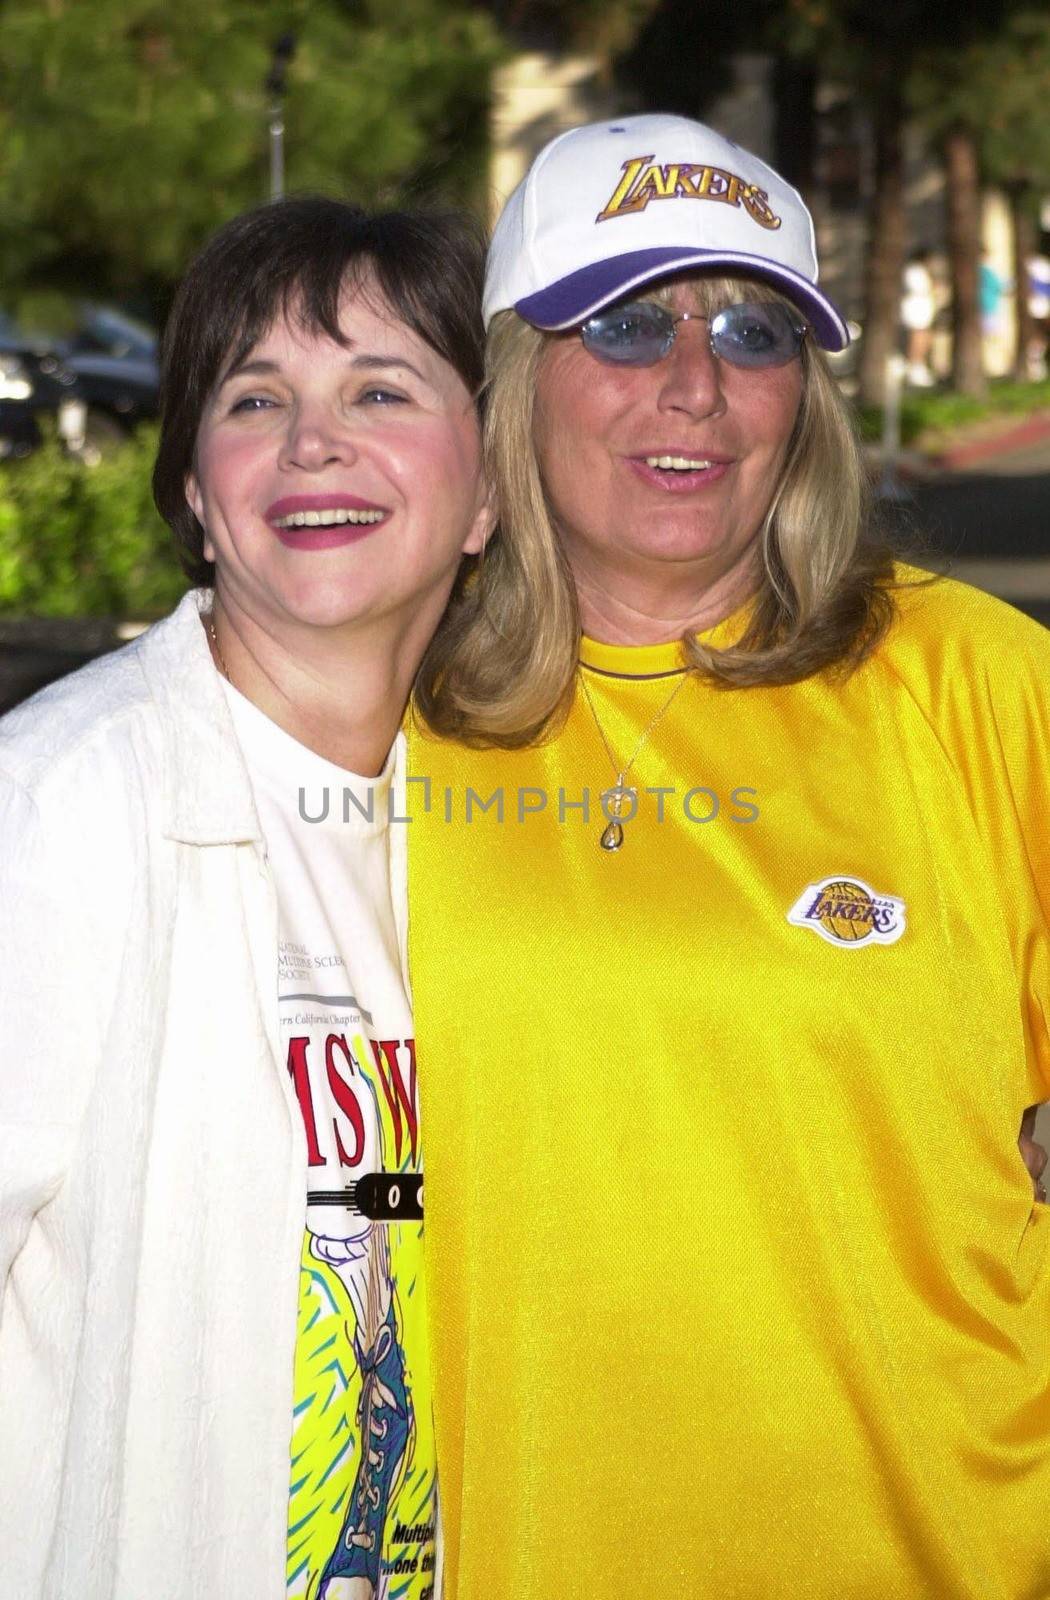 Cindy Williams and Penny Marshall at the MS Walk 2000, where the cast of "Laverne and Shirley" reunited. Burbank, 04-09-00